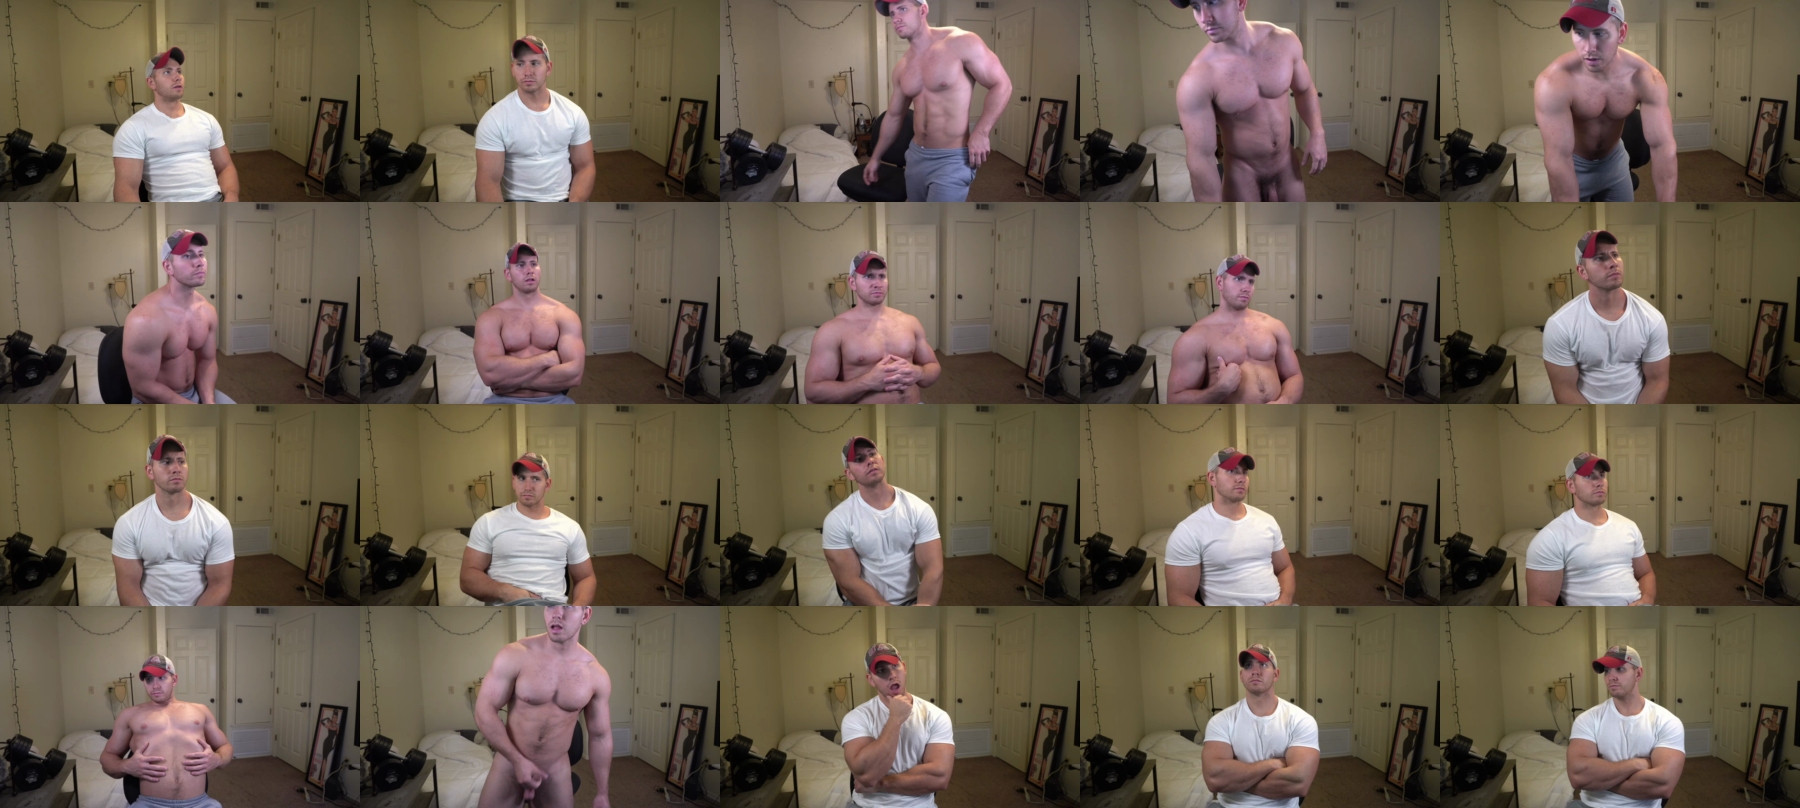 Hotmuscles6t9  28-04-2021 Male Topless